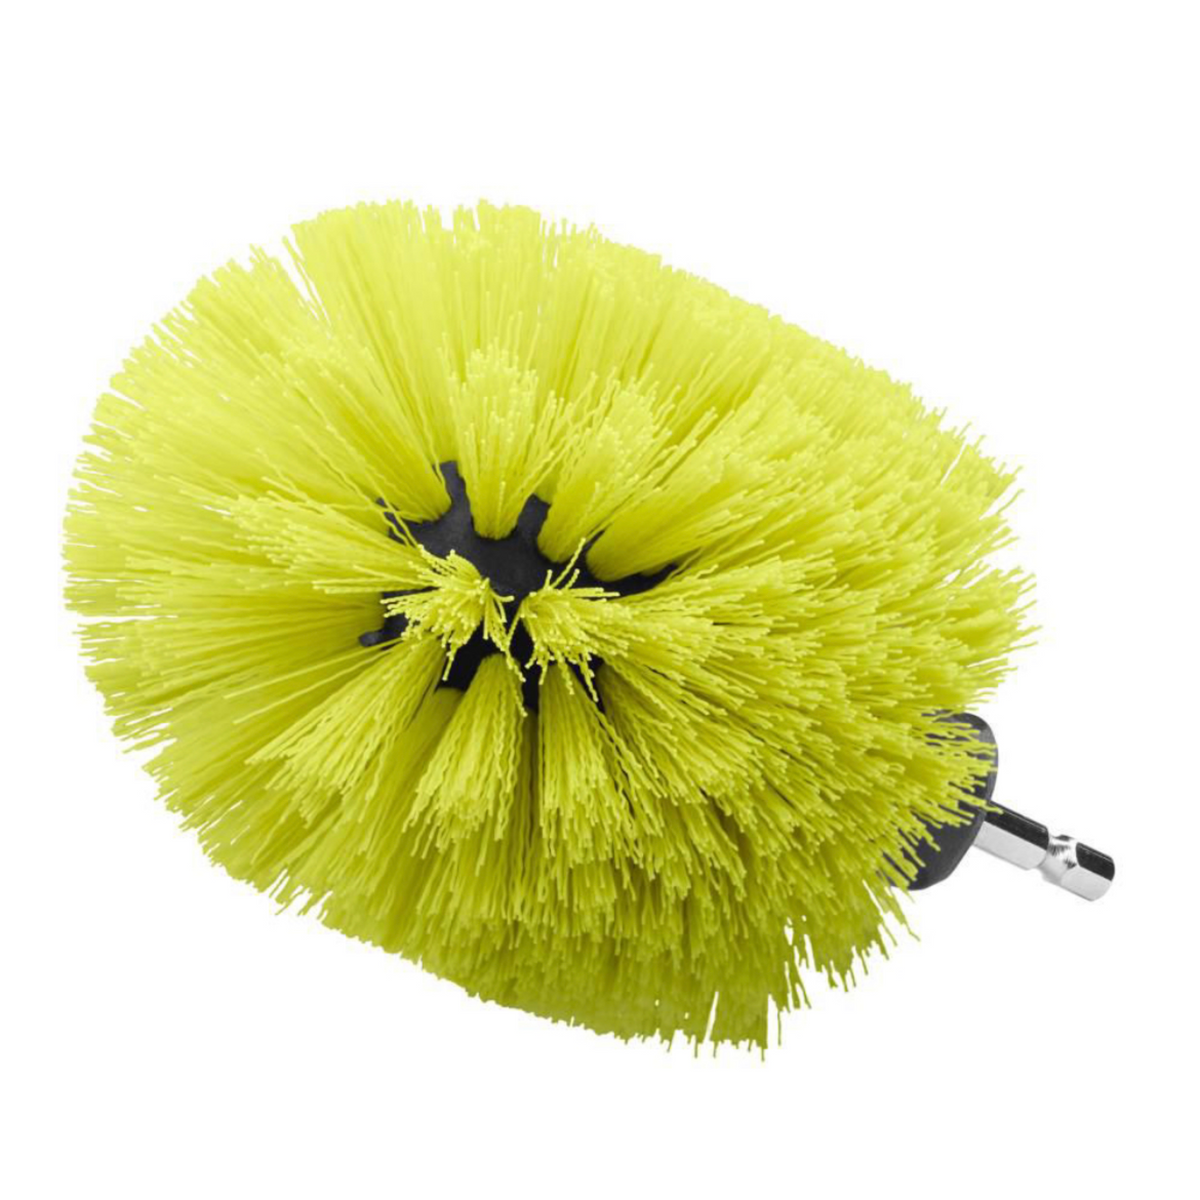 Soft Bristle Brush Cleaning Kit (2-Piece) – Ryobi Deal Finders